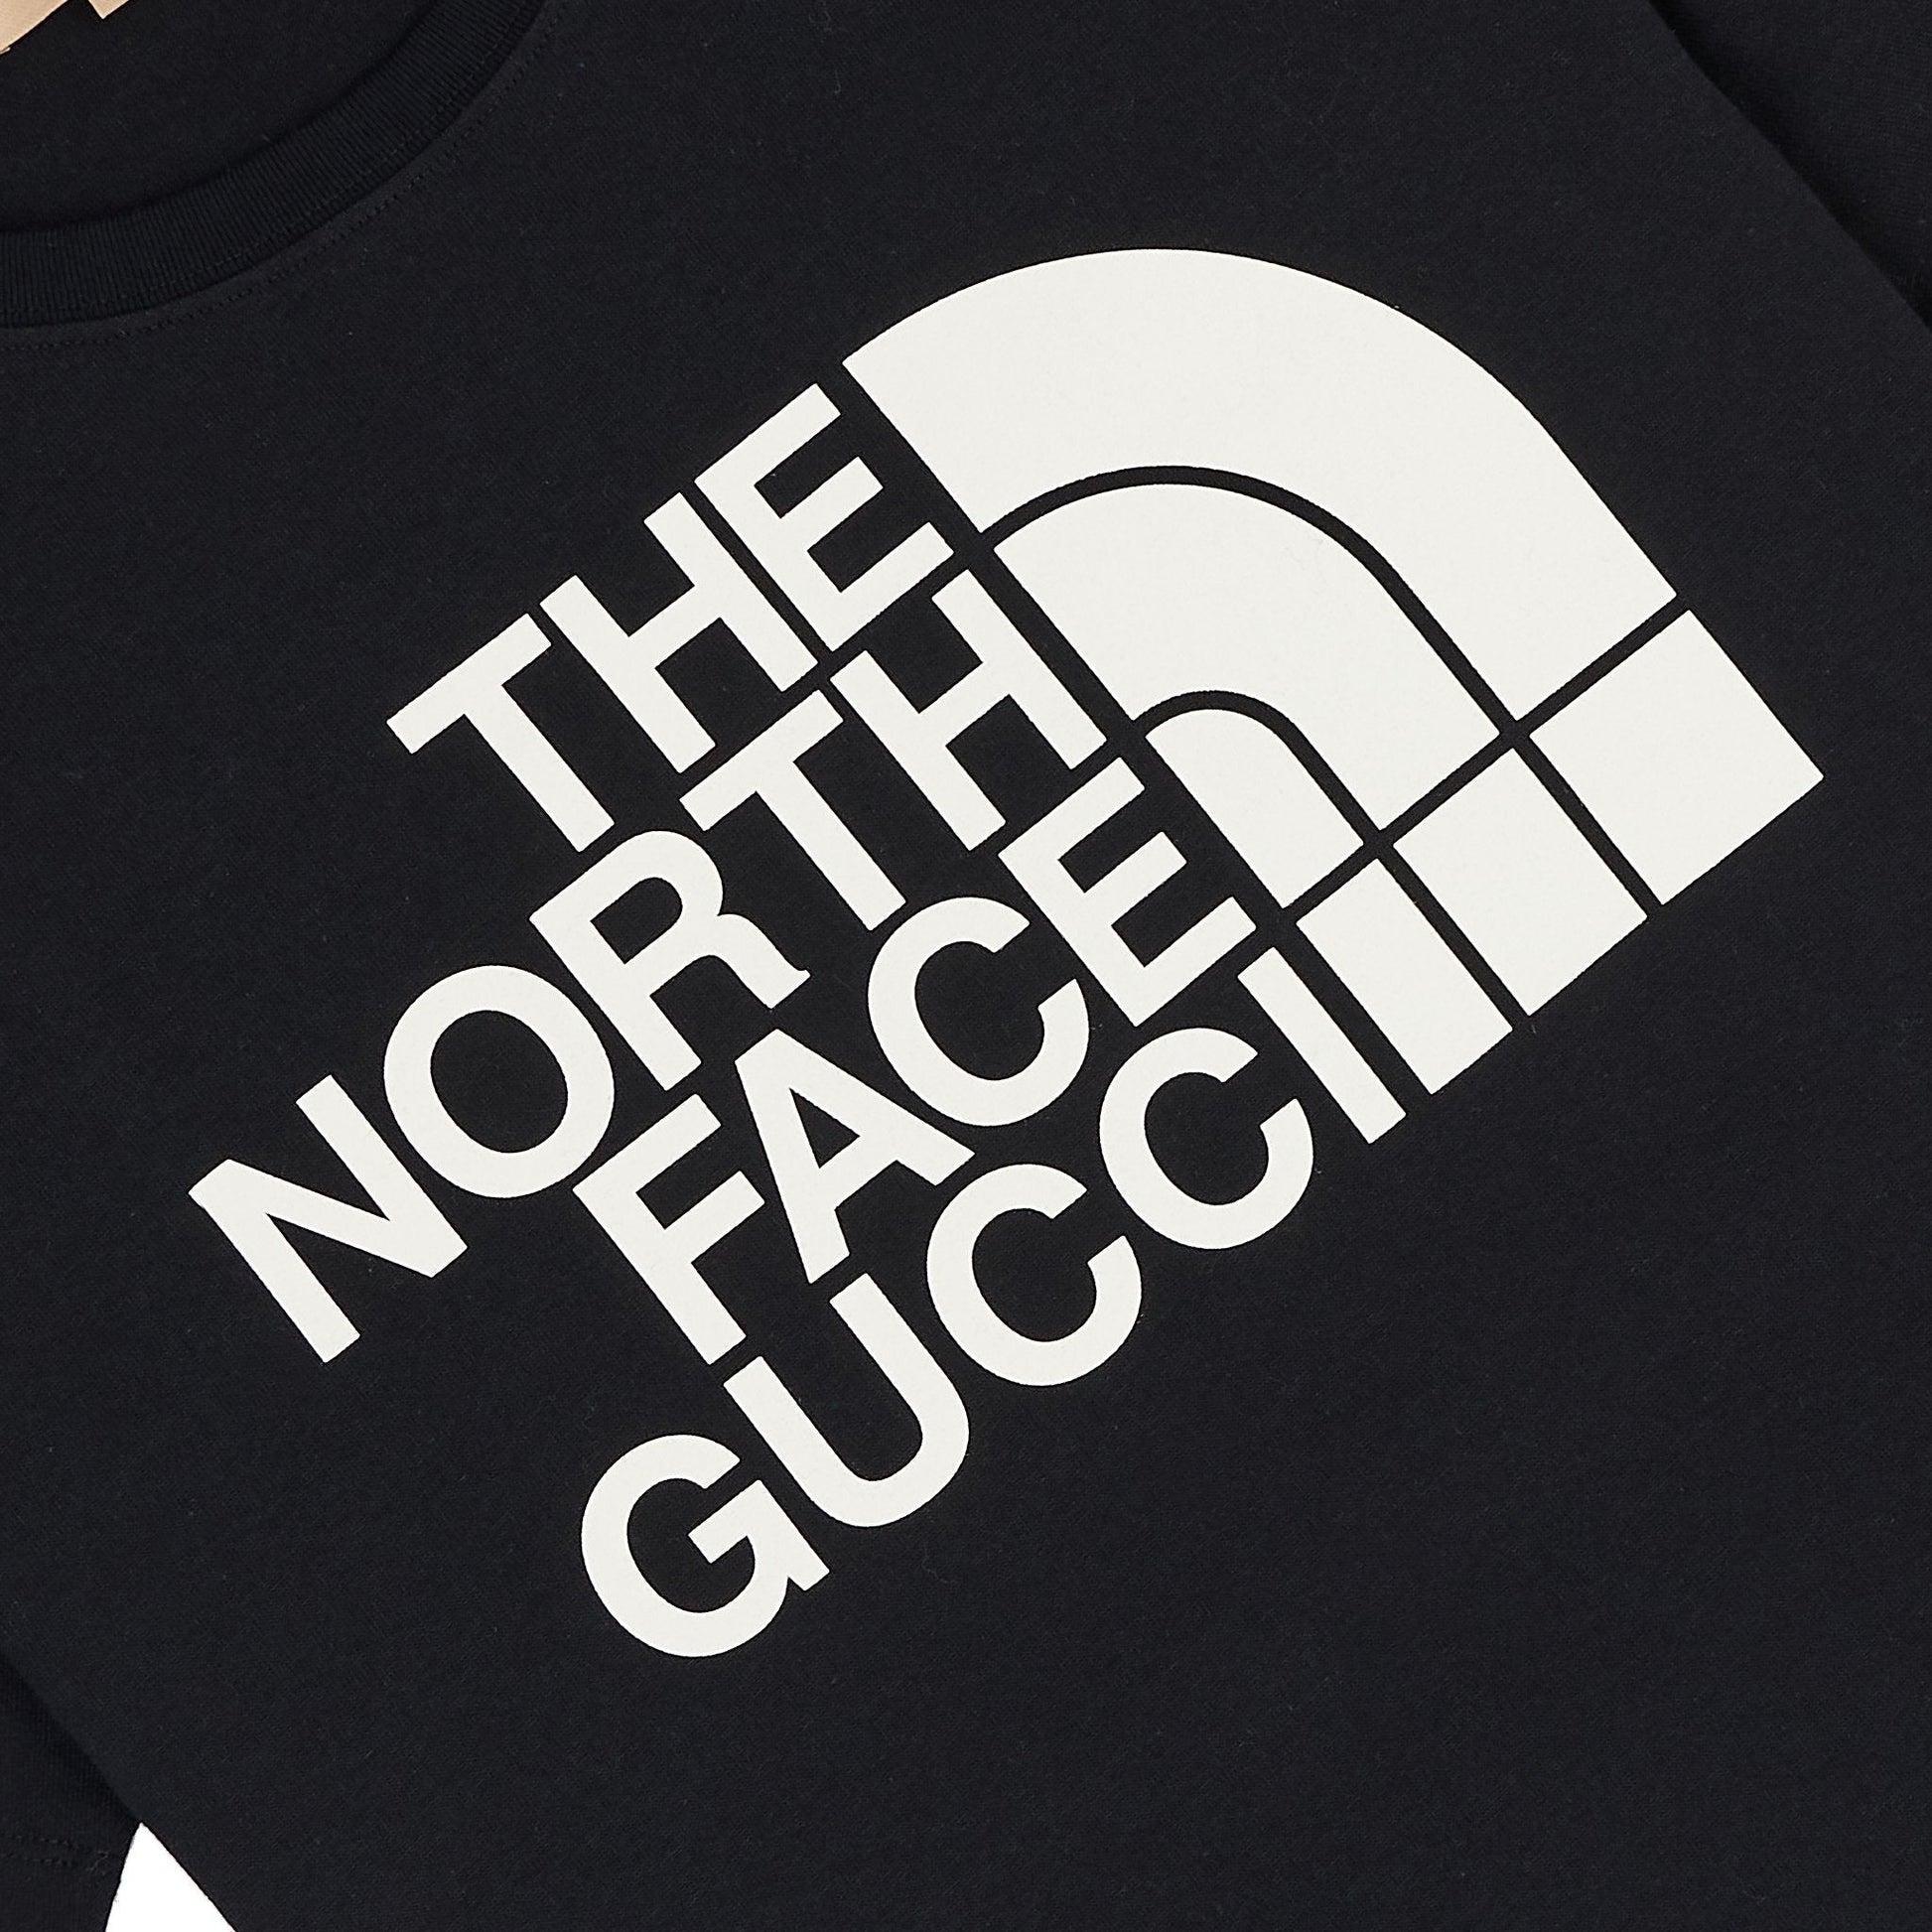 Gucci x The North Face Oversize T-Shirt Gold